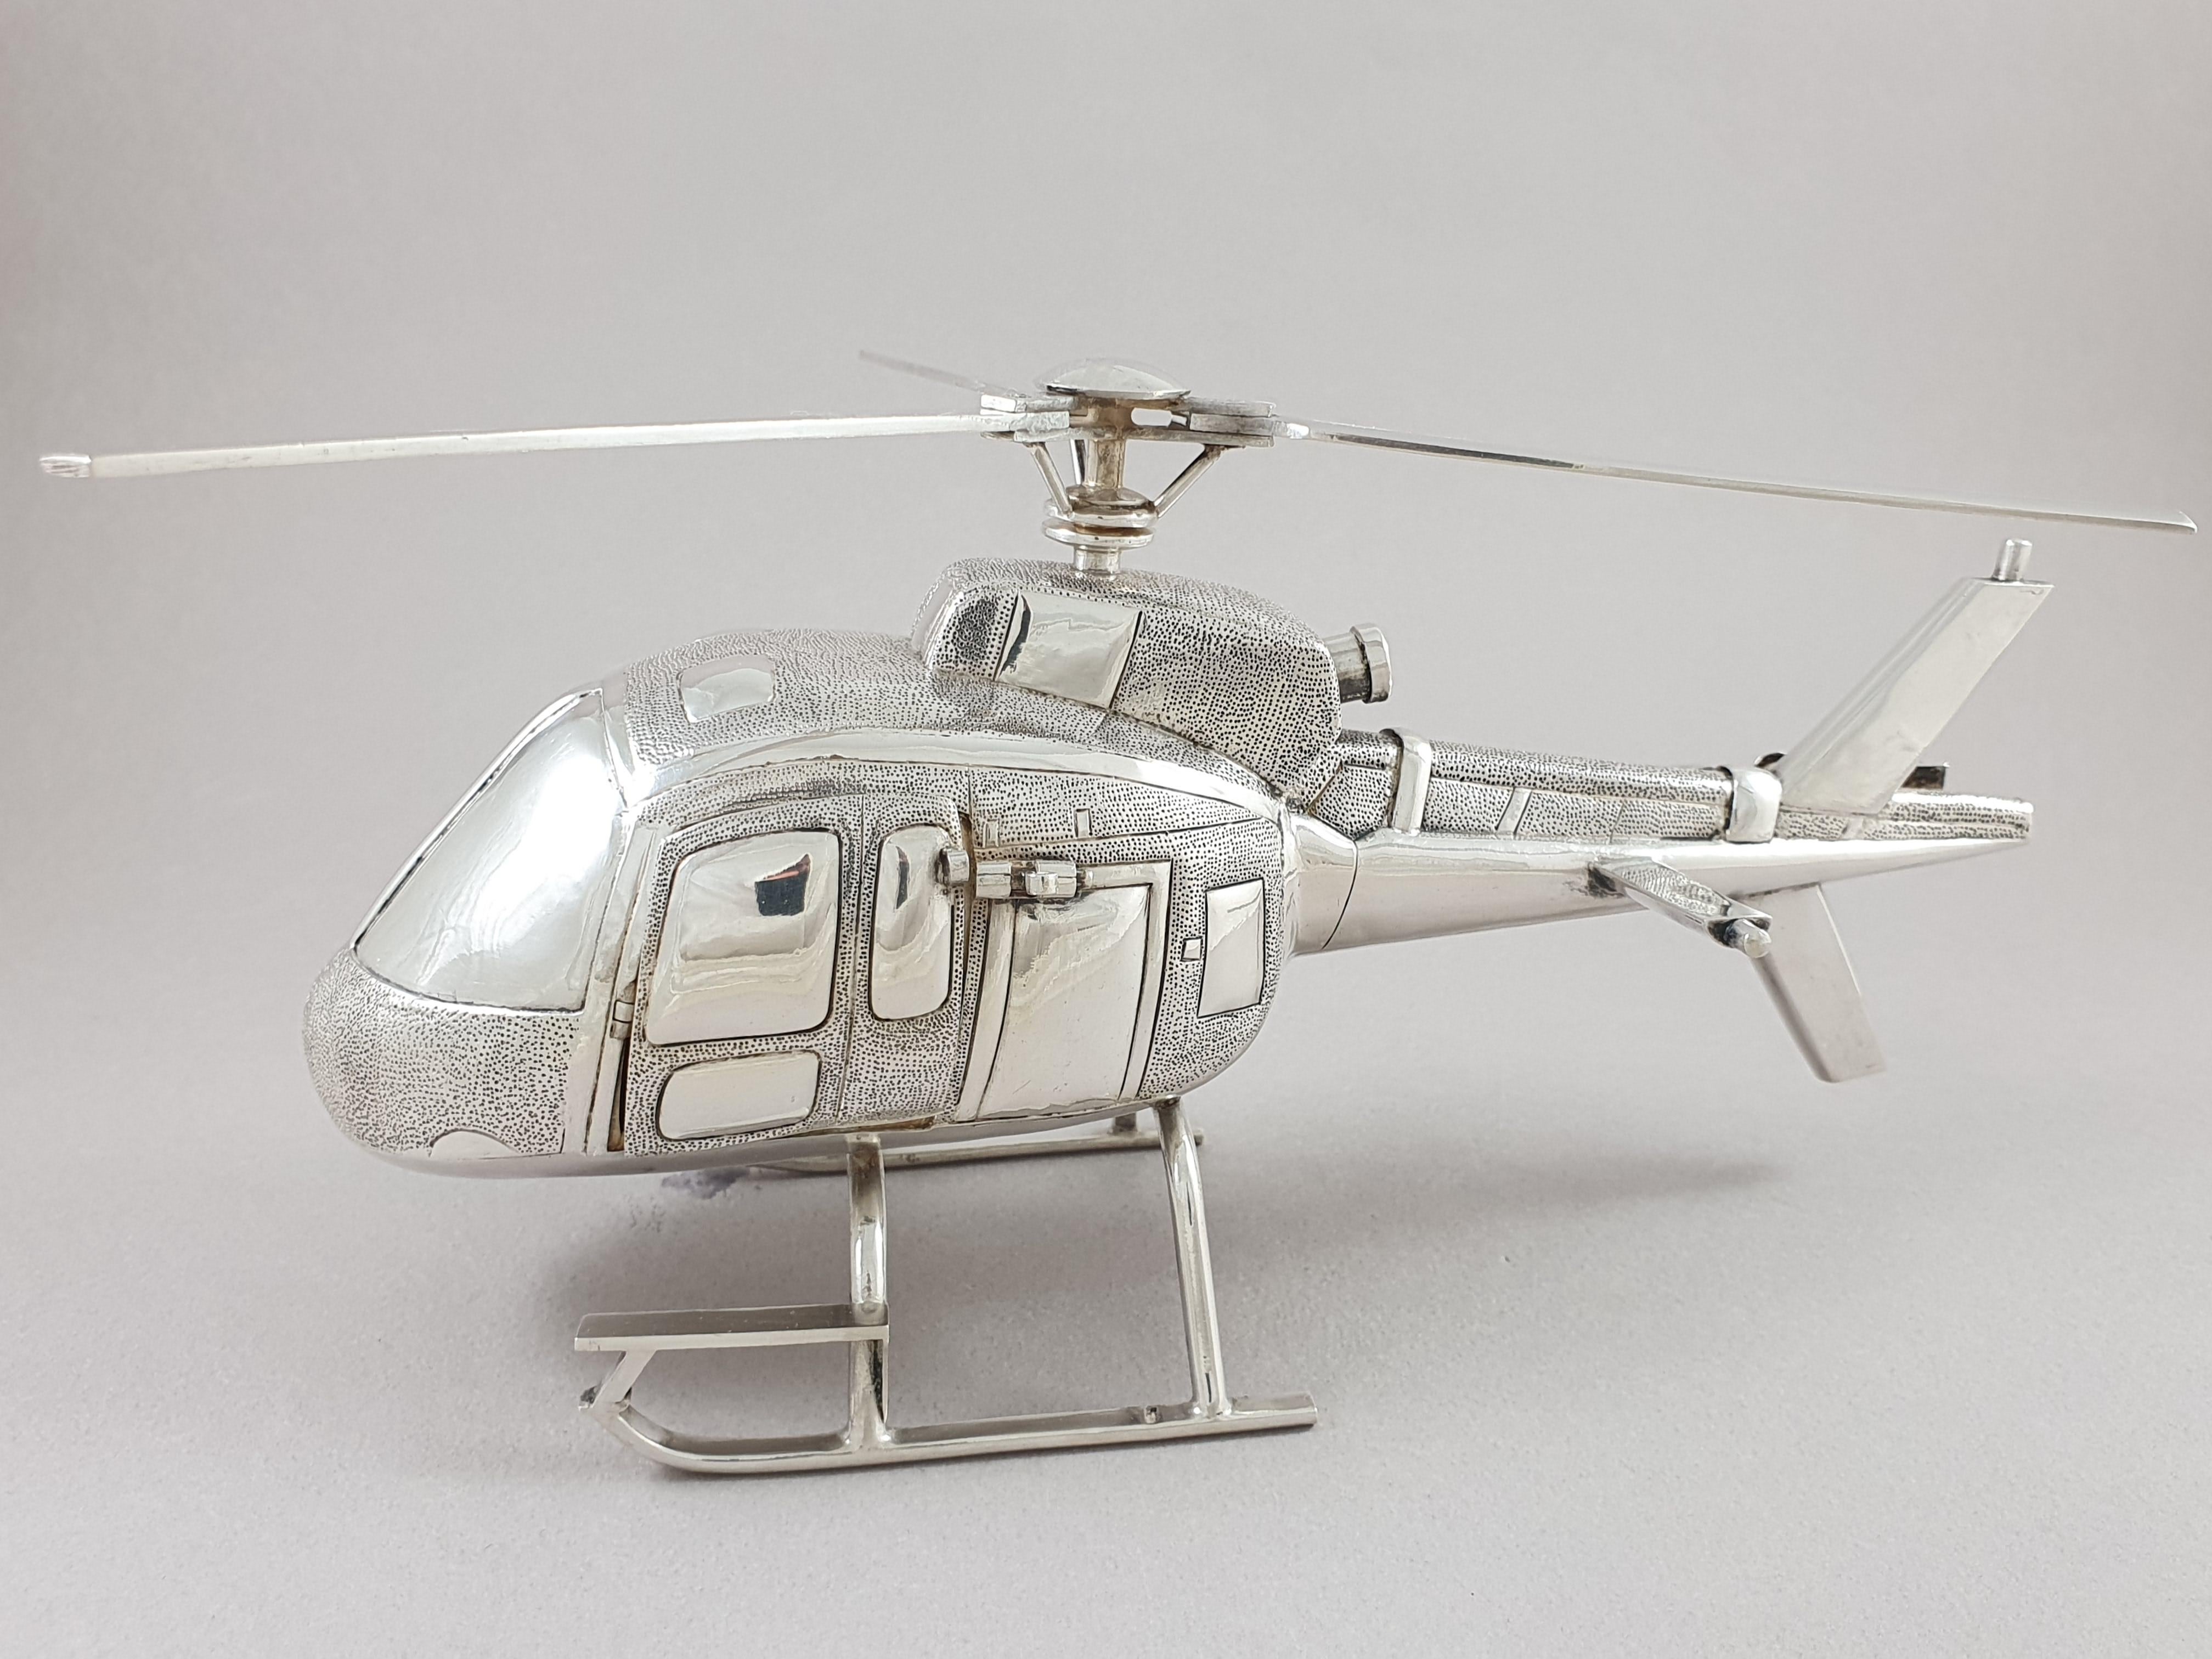 Sterling Silver helicopter, 20th century work

The doors open and the propellers spin

925 silver hallmark

Measures: Length: 20cm - 7.87 inches 
Height: 11.5cm - 4.52 inches
Weight: 248 grams

Great condition.